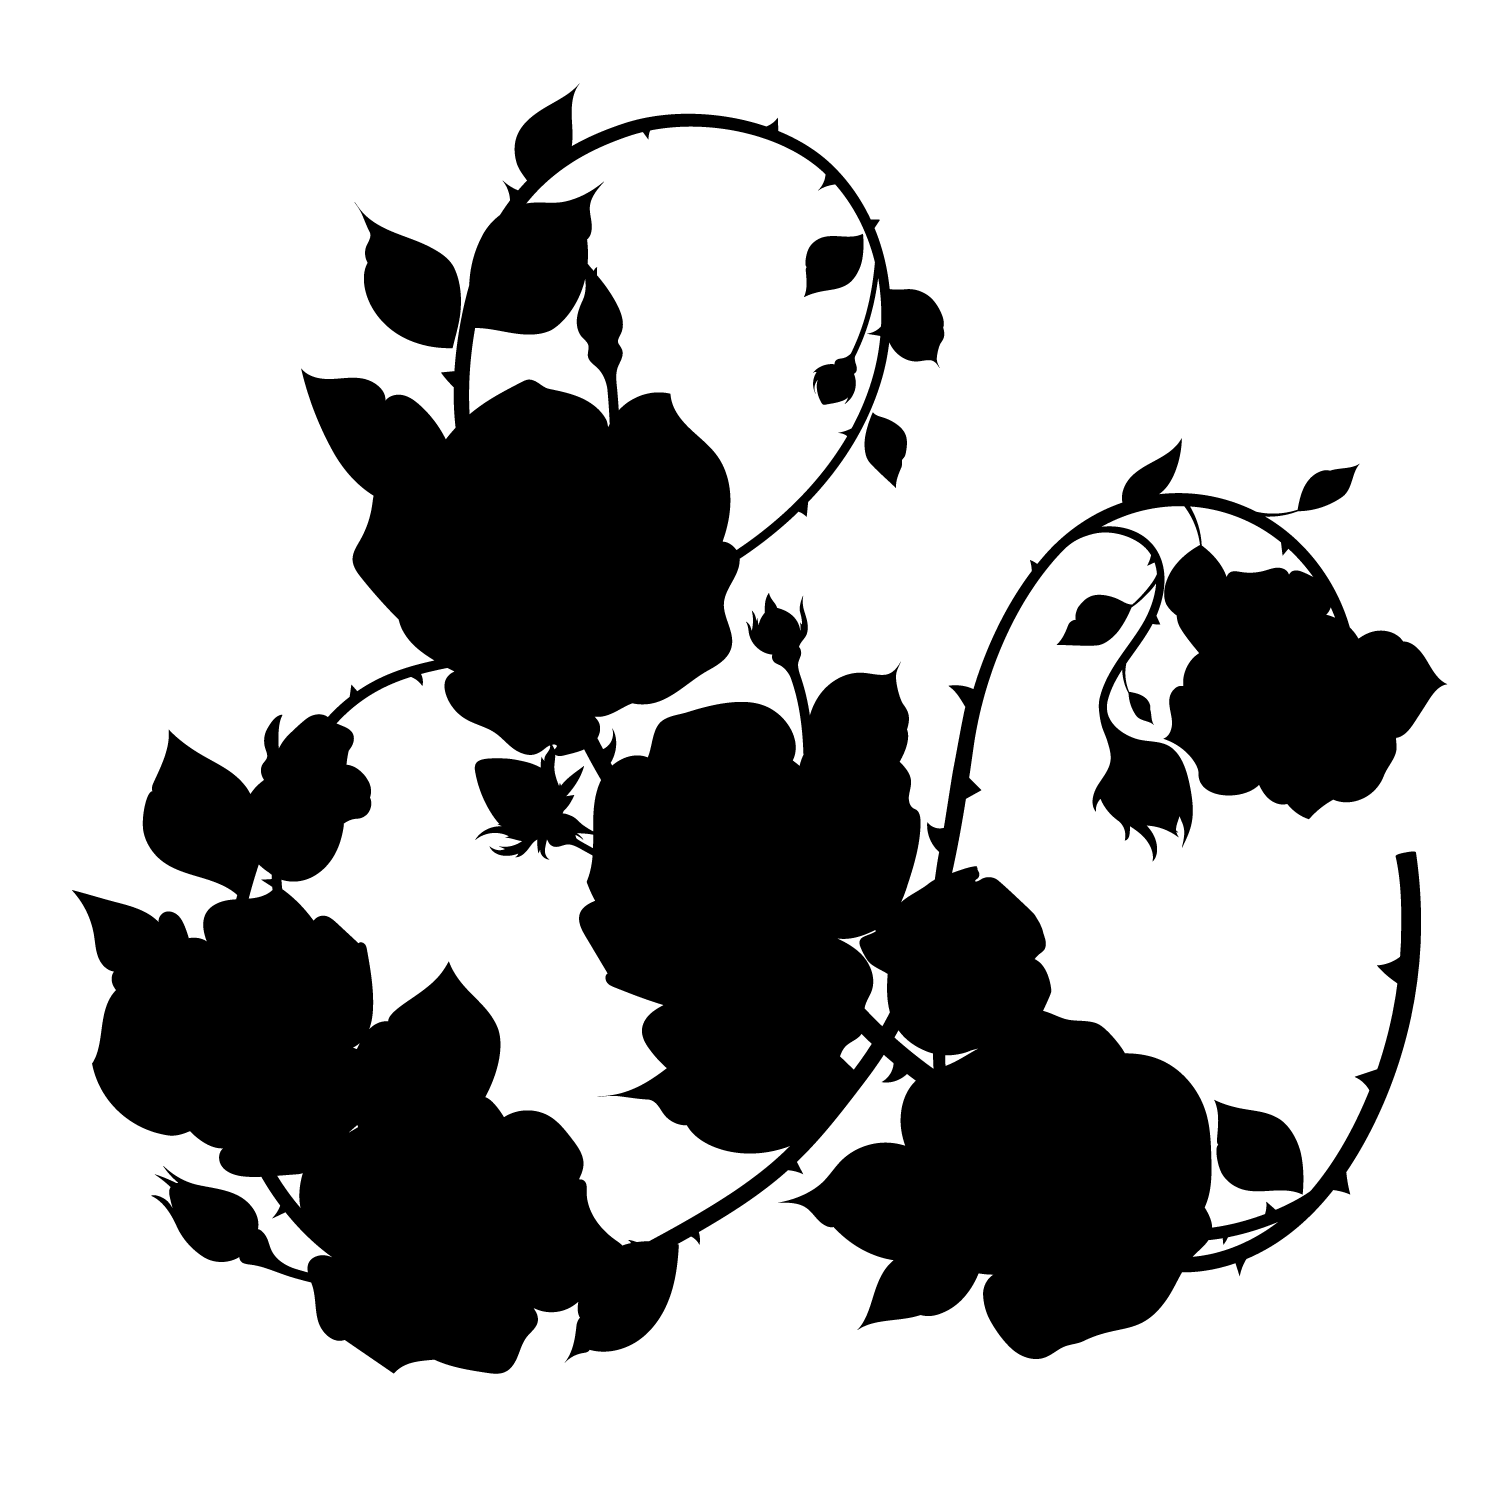 This is the floral elements of the rose ampersand in silhouette.